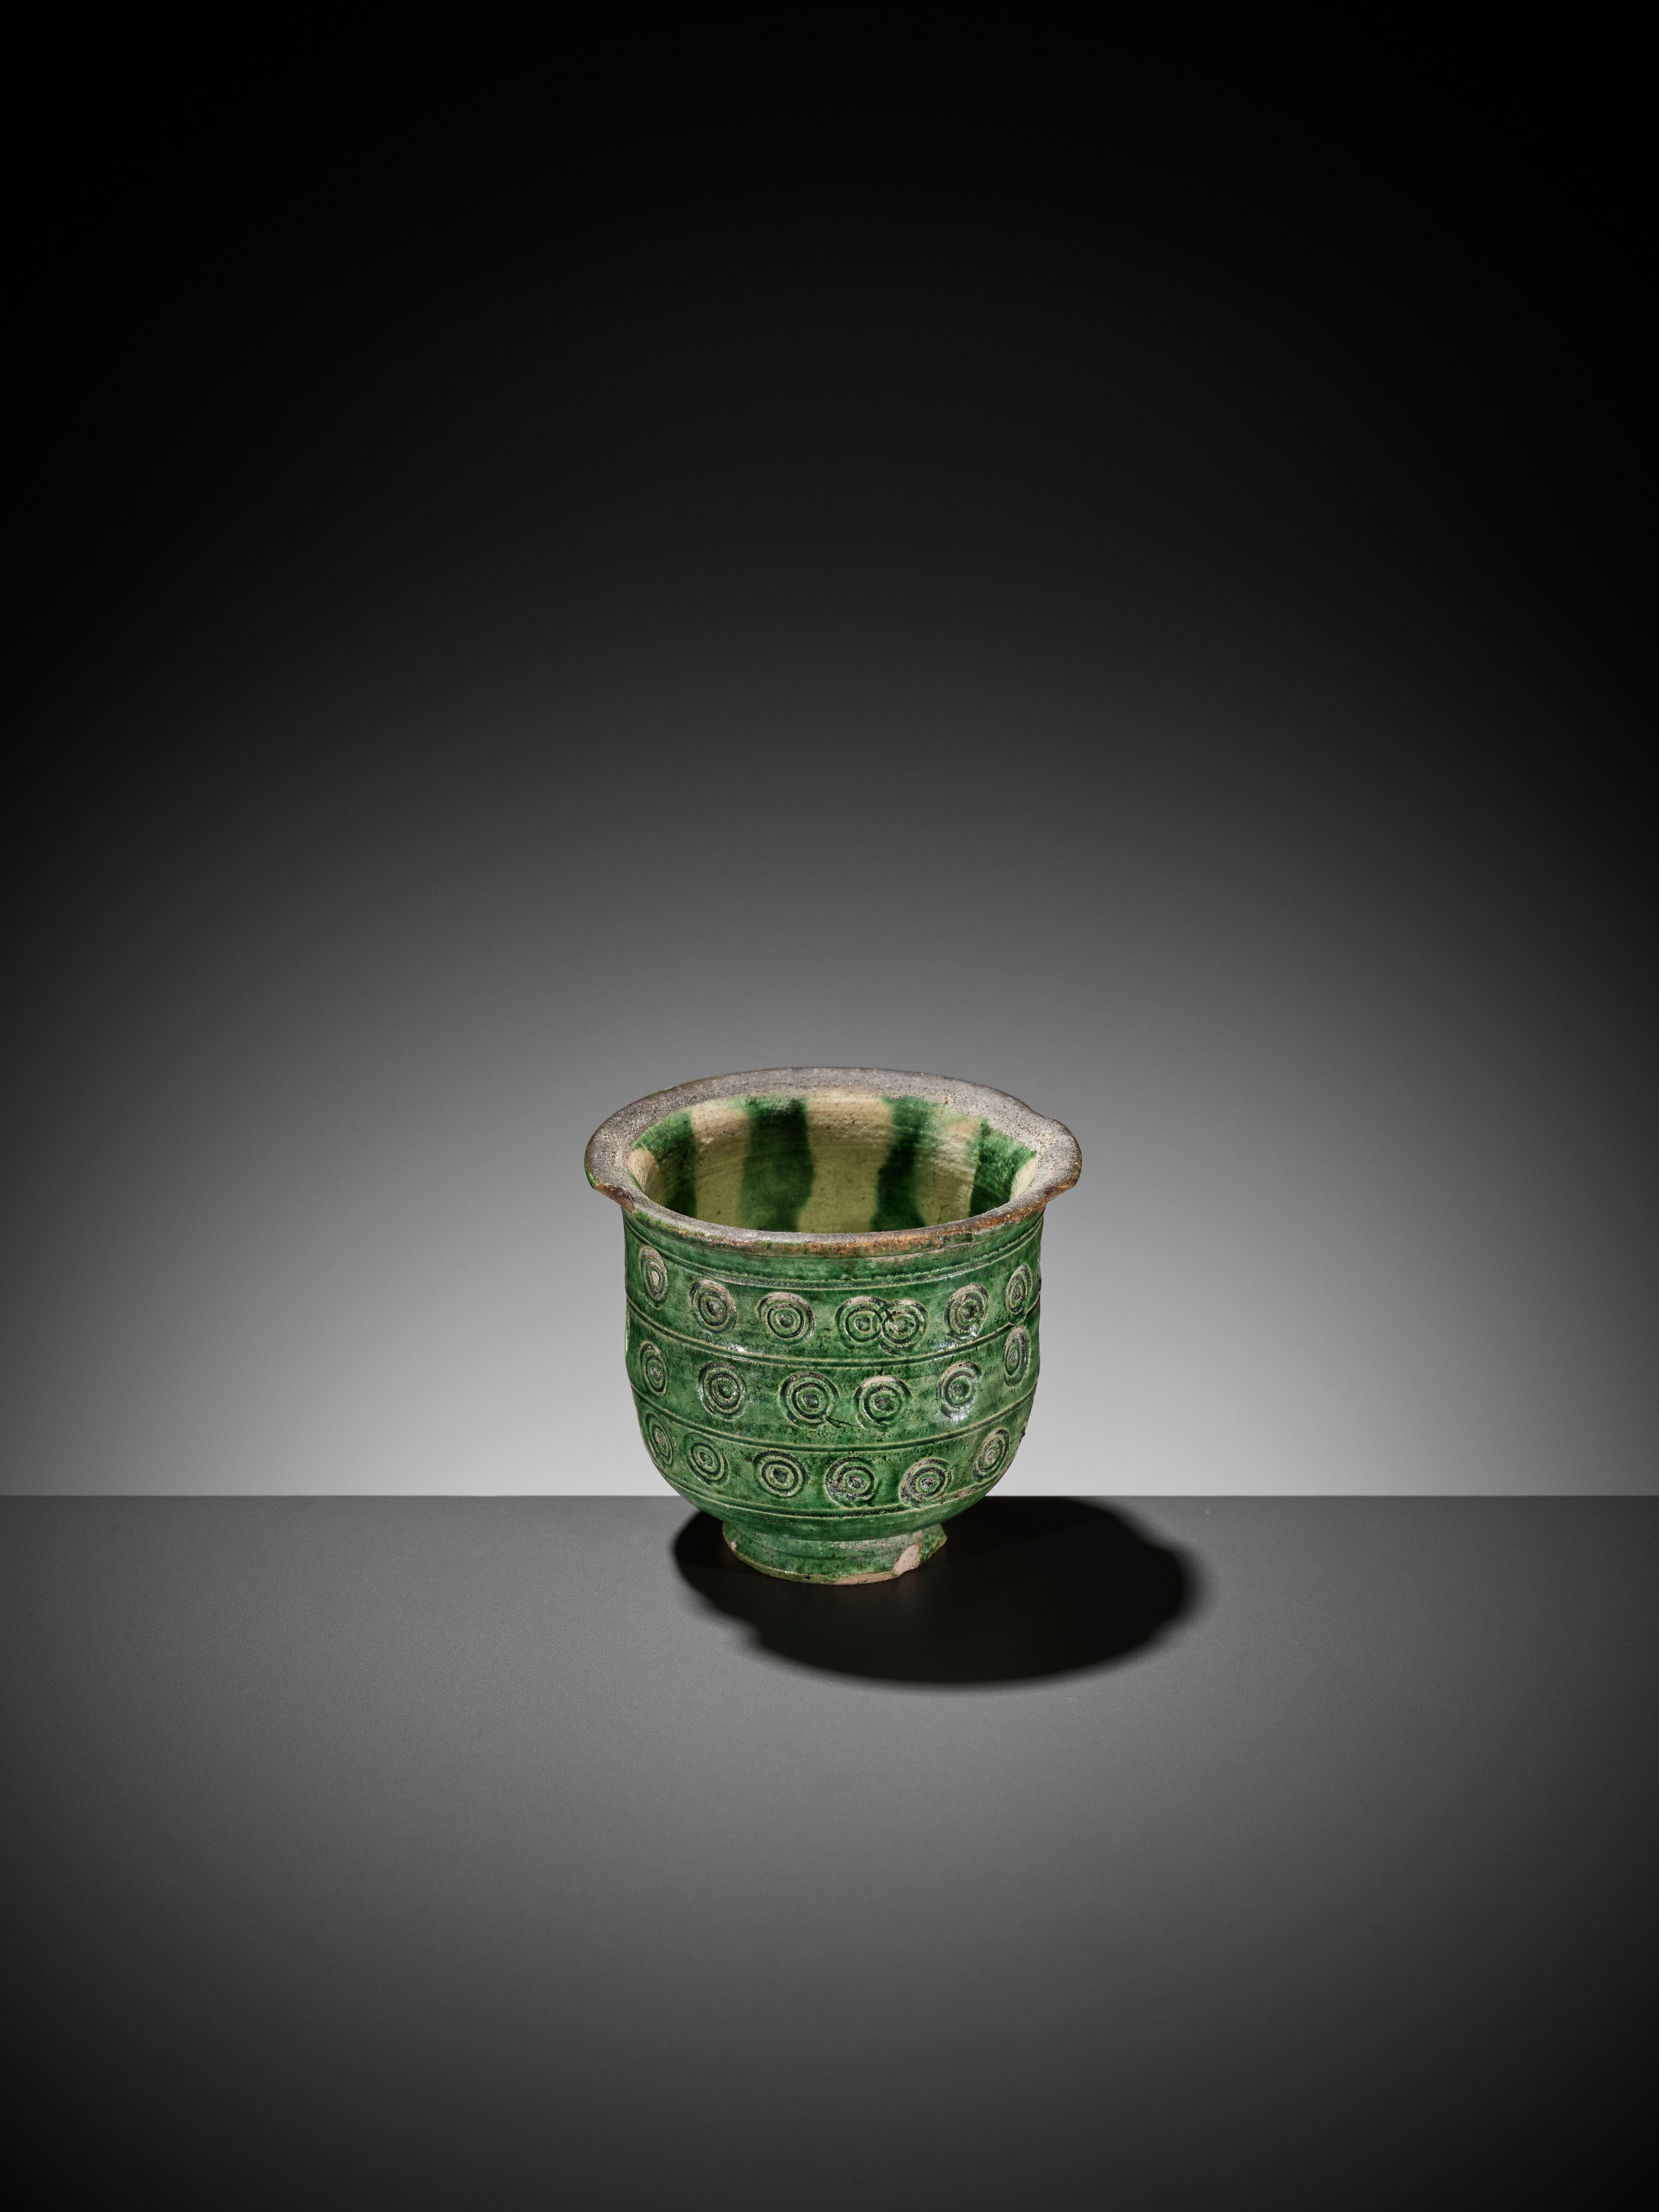 A RARE GREEN-GLAZED BELL-SHAPED CUP, TANG DYNASTY - Image 2 of 8